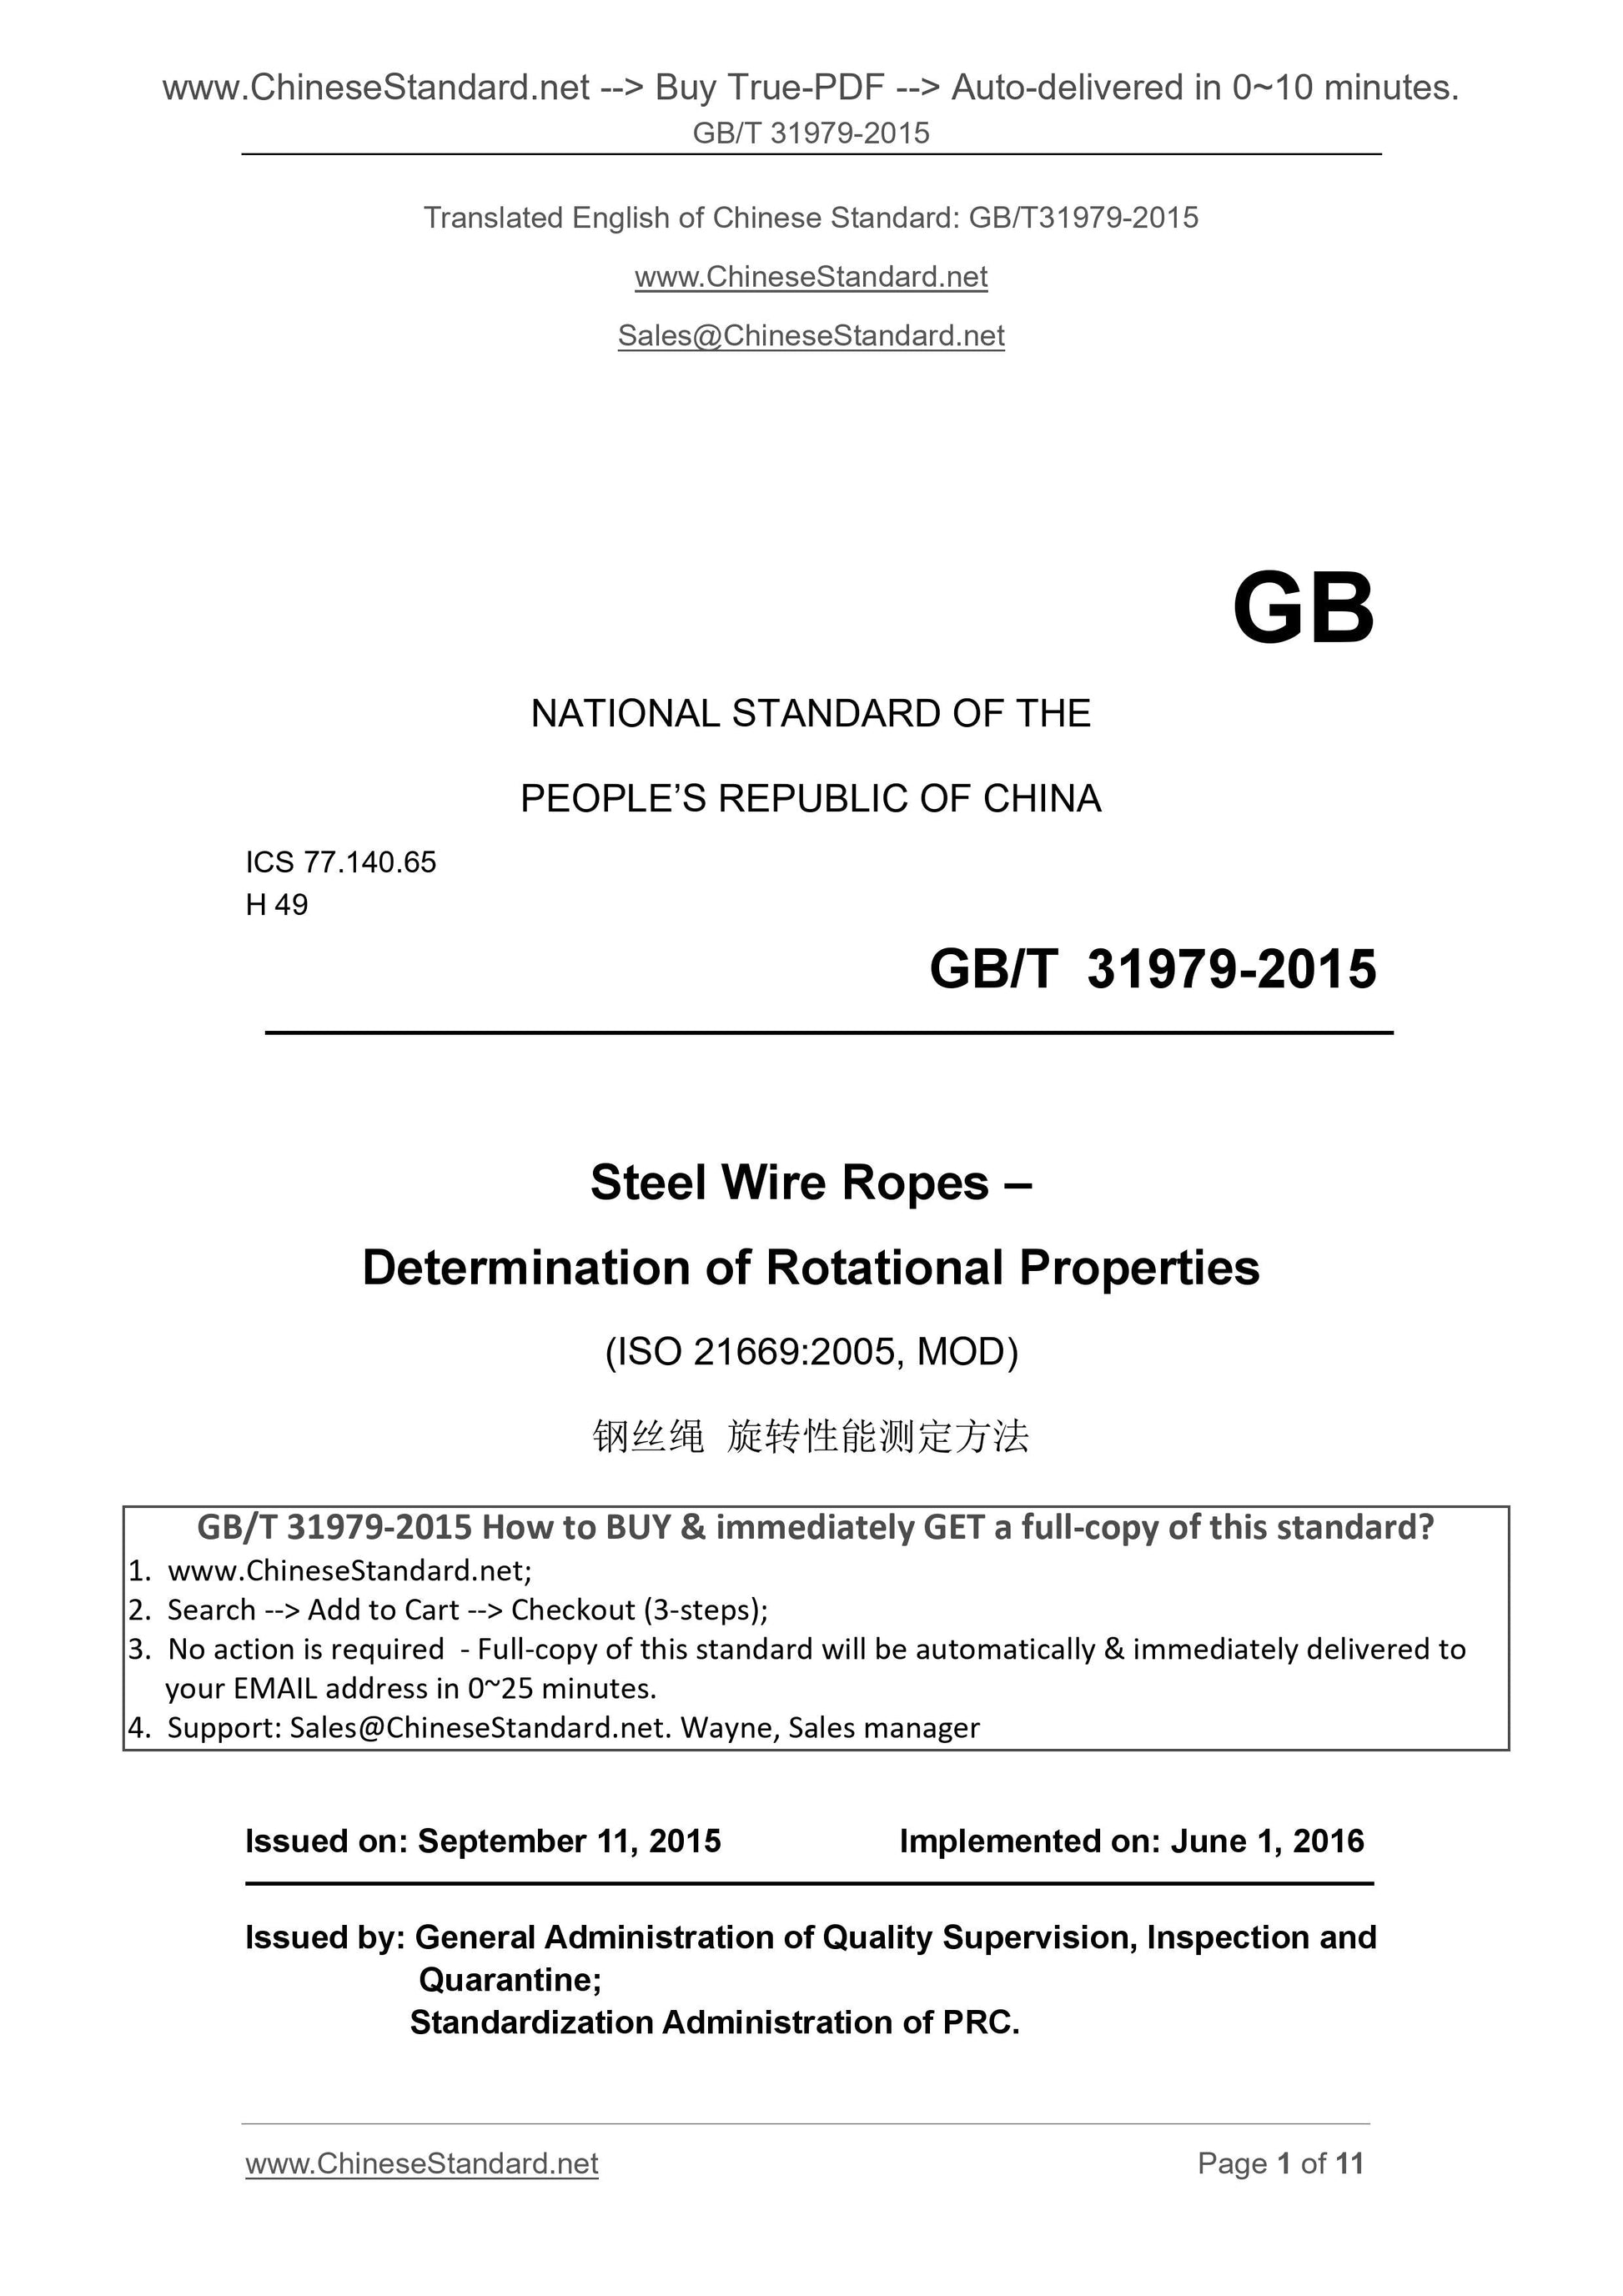 GB/T 31979-2015 Page 1